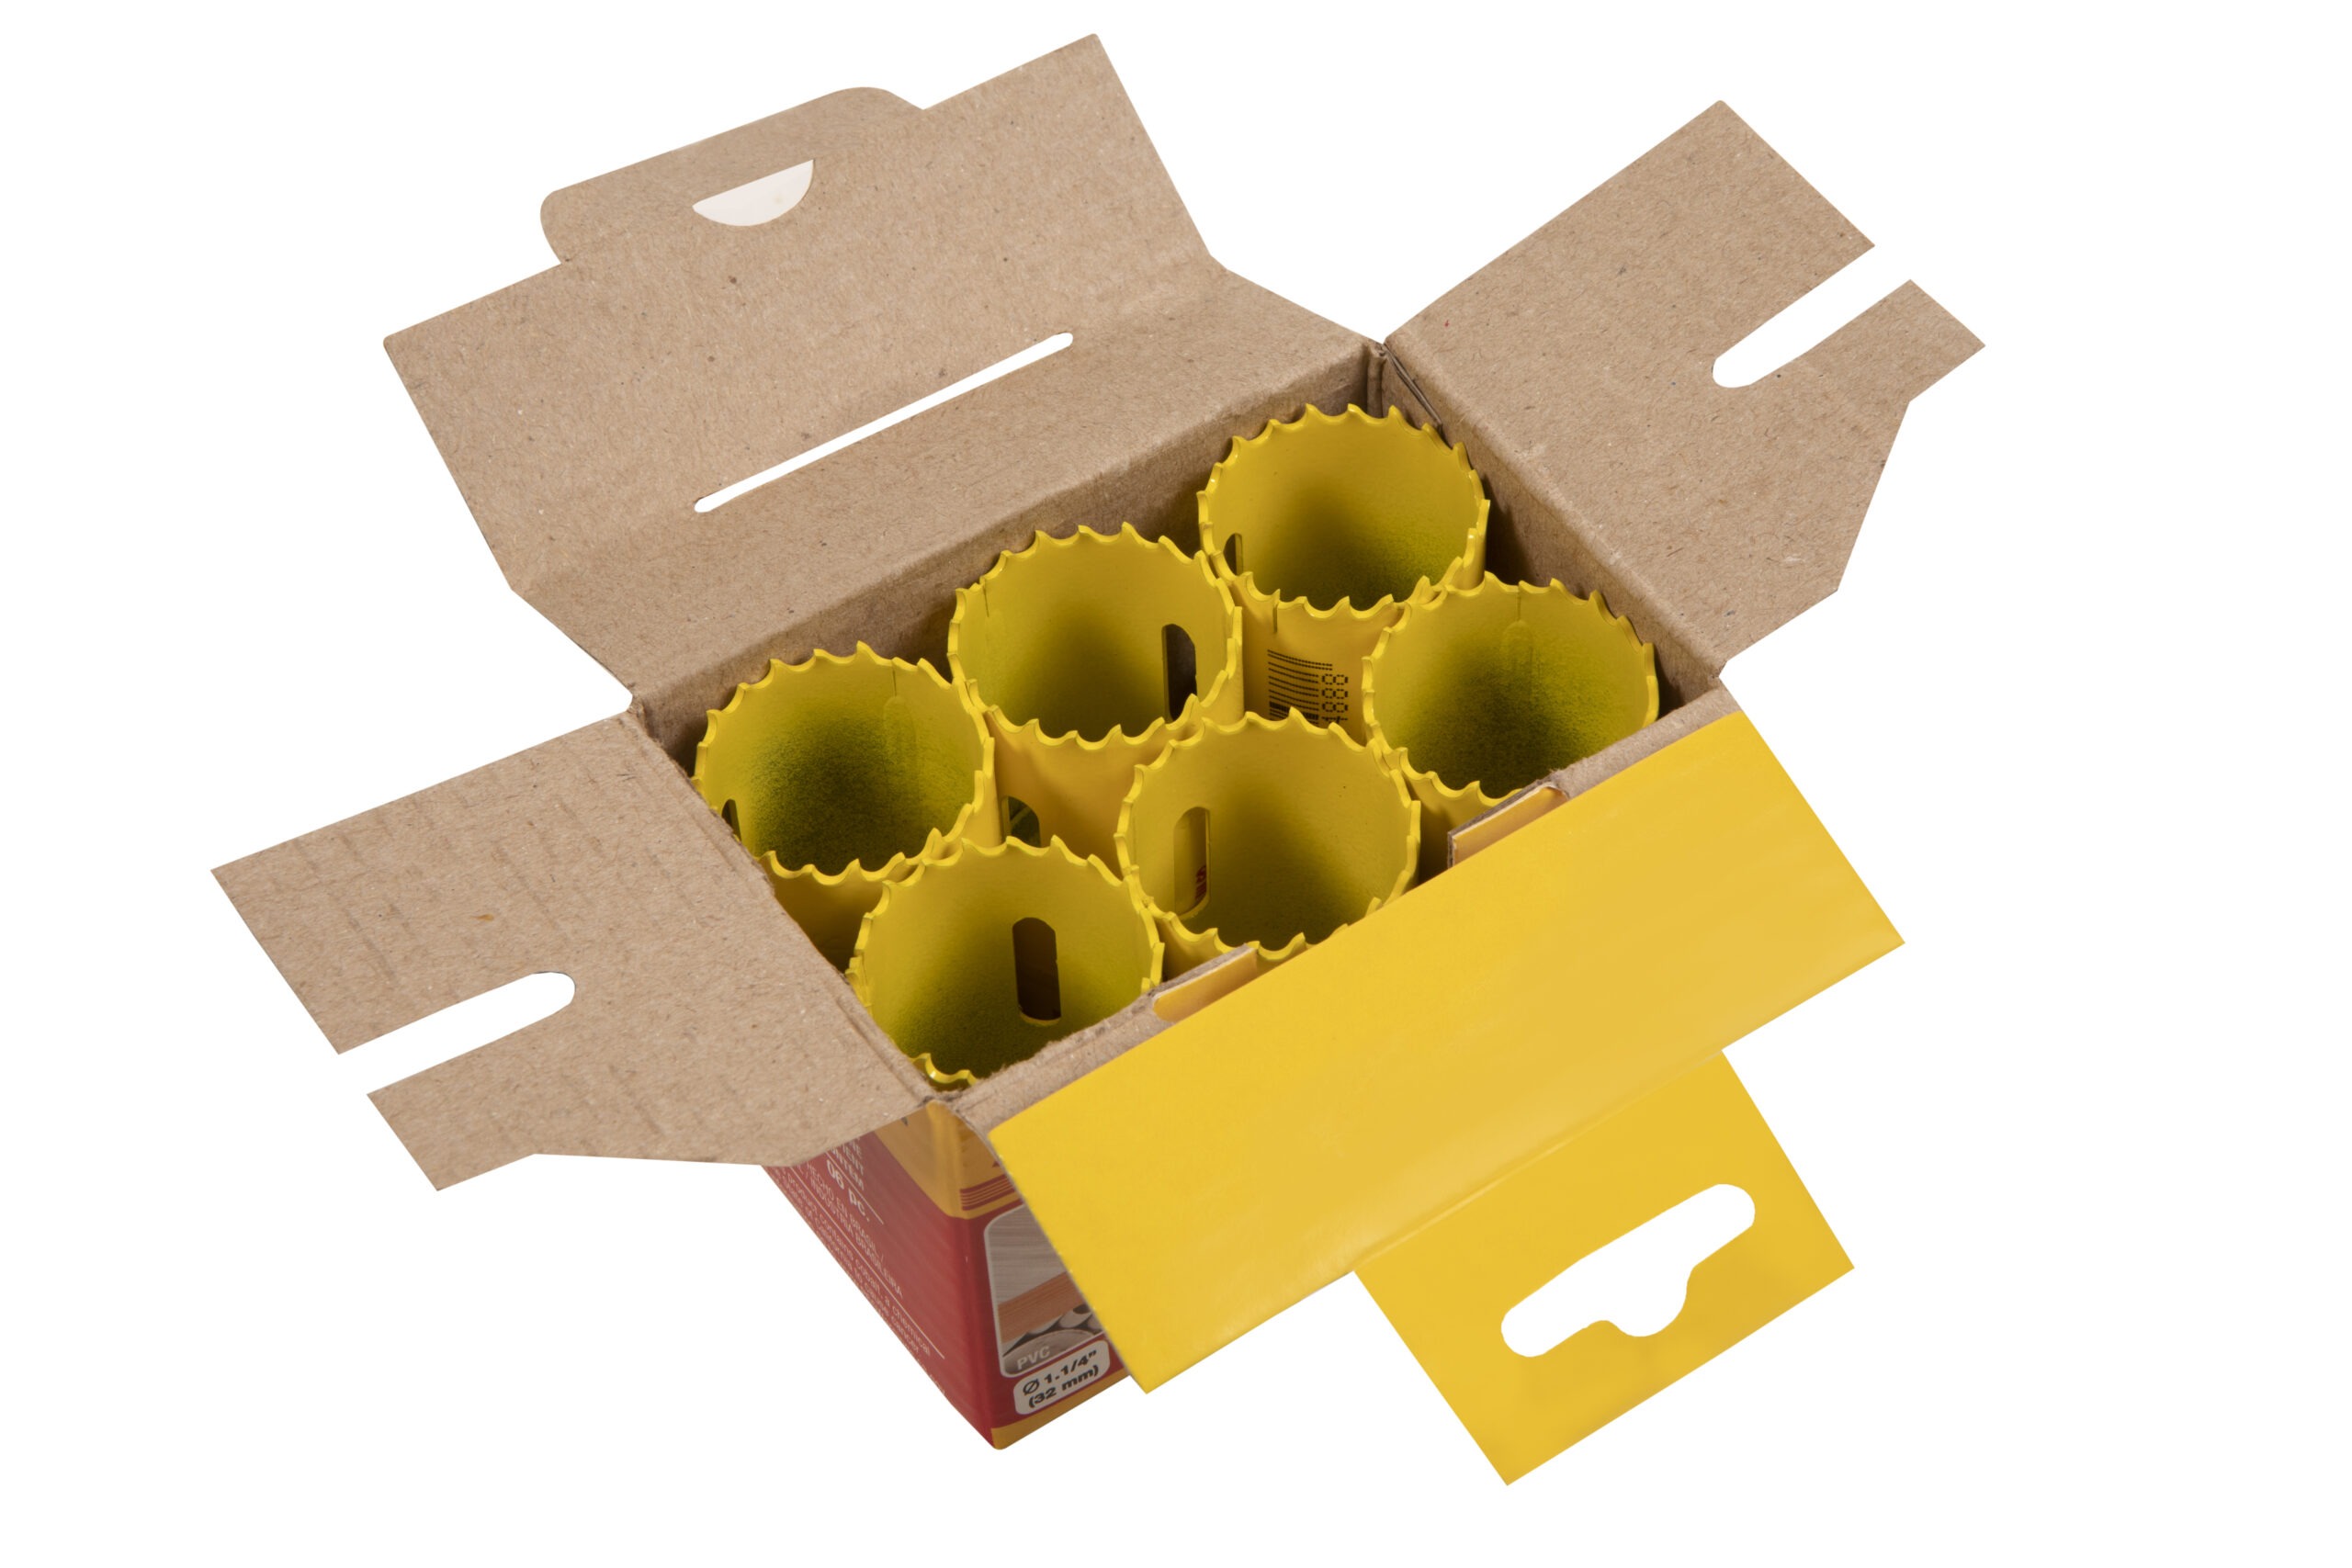 fch-holesaw-6pack_opened-box